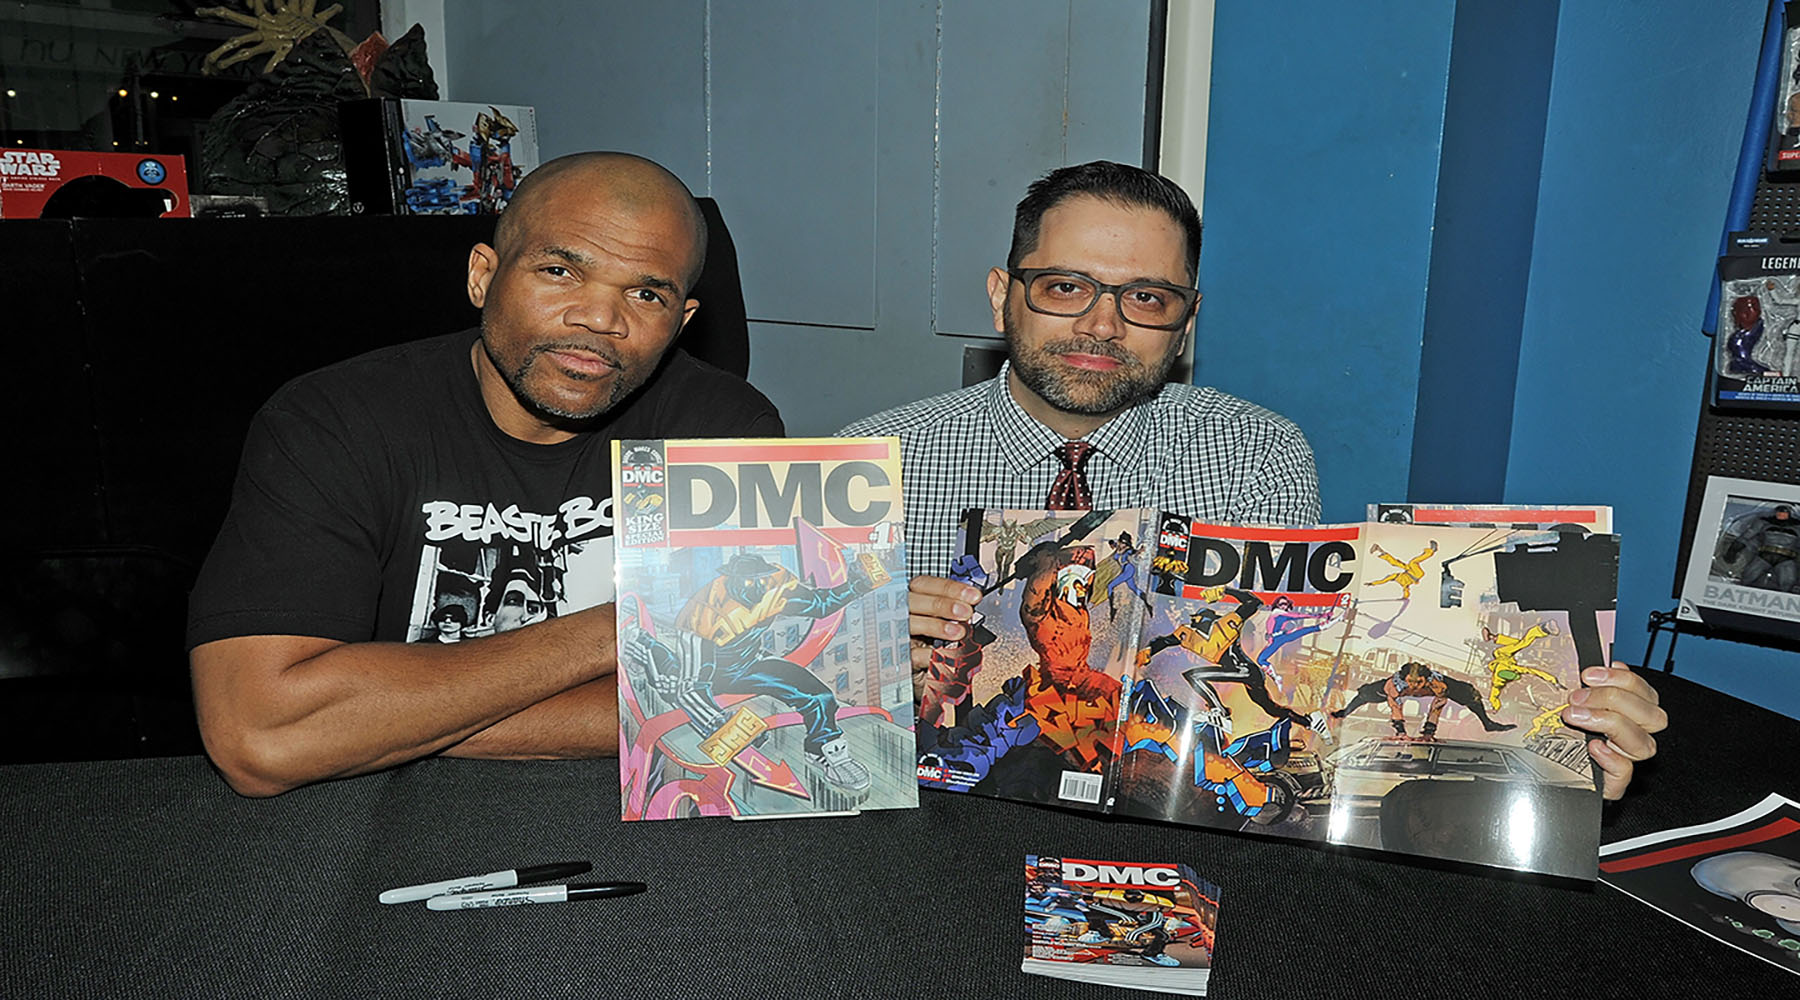 NEW YORK, NY - MARCH 02: Darryl "DMC" McDaniels and Edgardo Miranda Rodriguez signs copies Of "DMC #2" & "Guardians Of Infinity #3" at Forbidden Planet on March 2, 2016 in New York City. (Photo by Bobby Bank/WireImage)